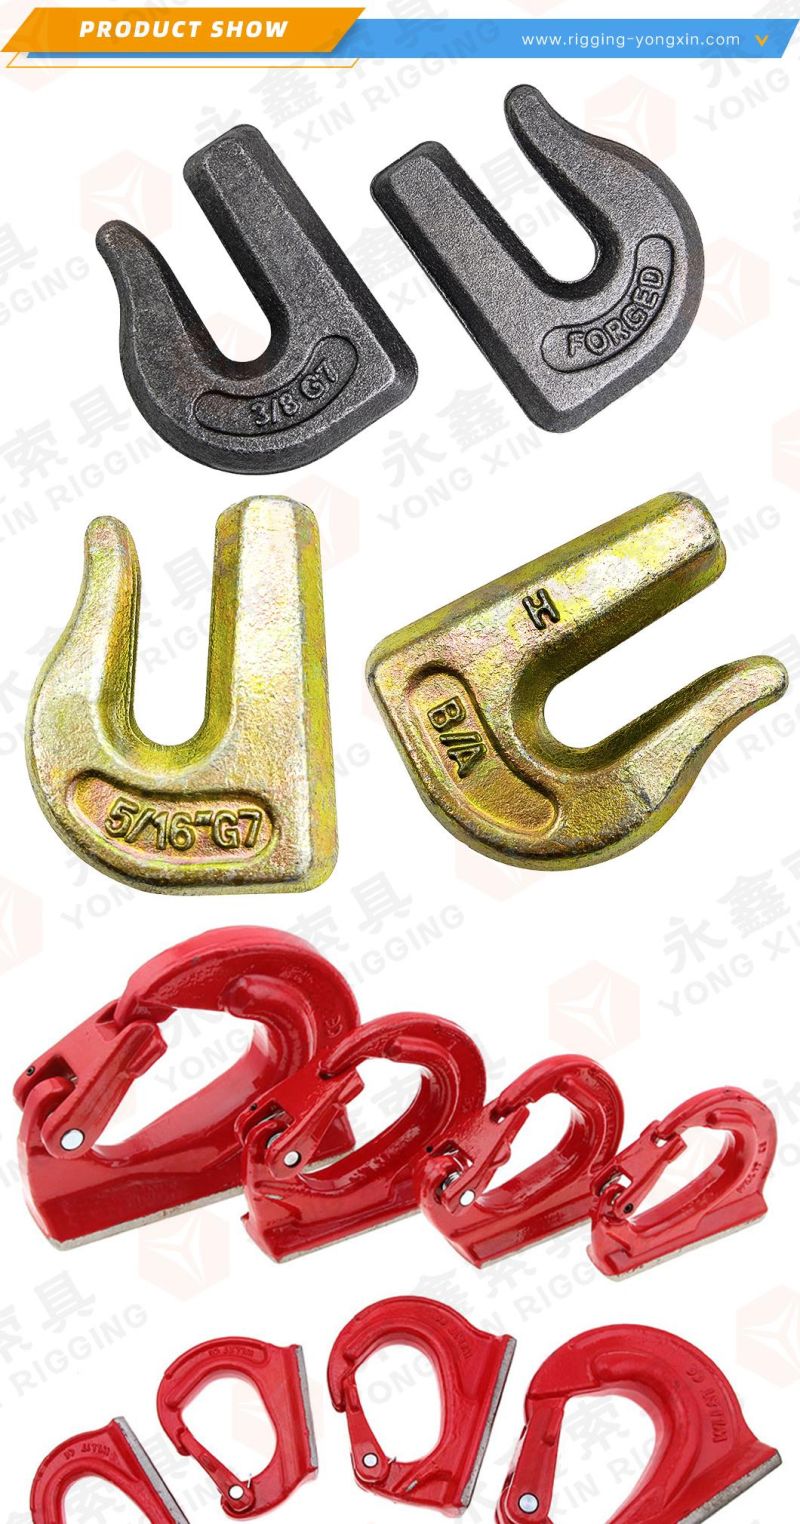 Weld on Grab Chain Hooks 3/8" G70 Best to Weld on Tractor Bucket